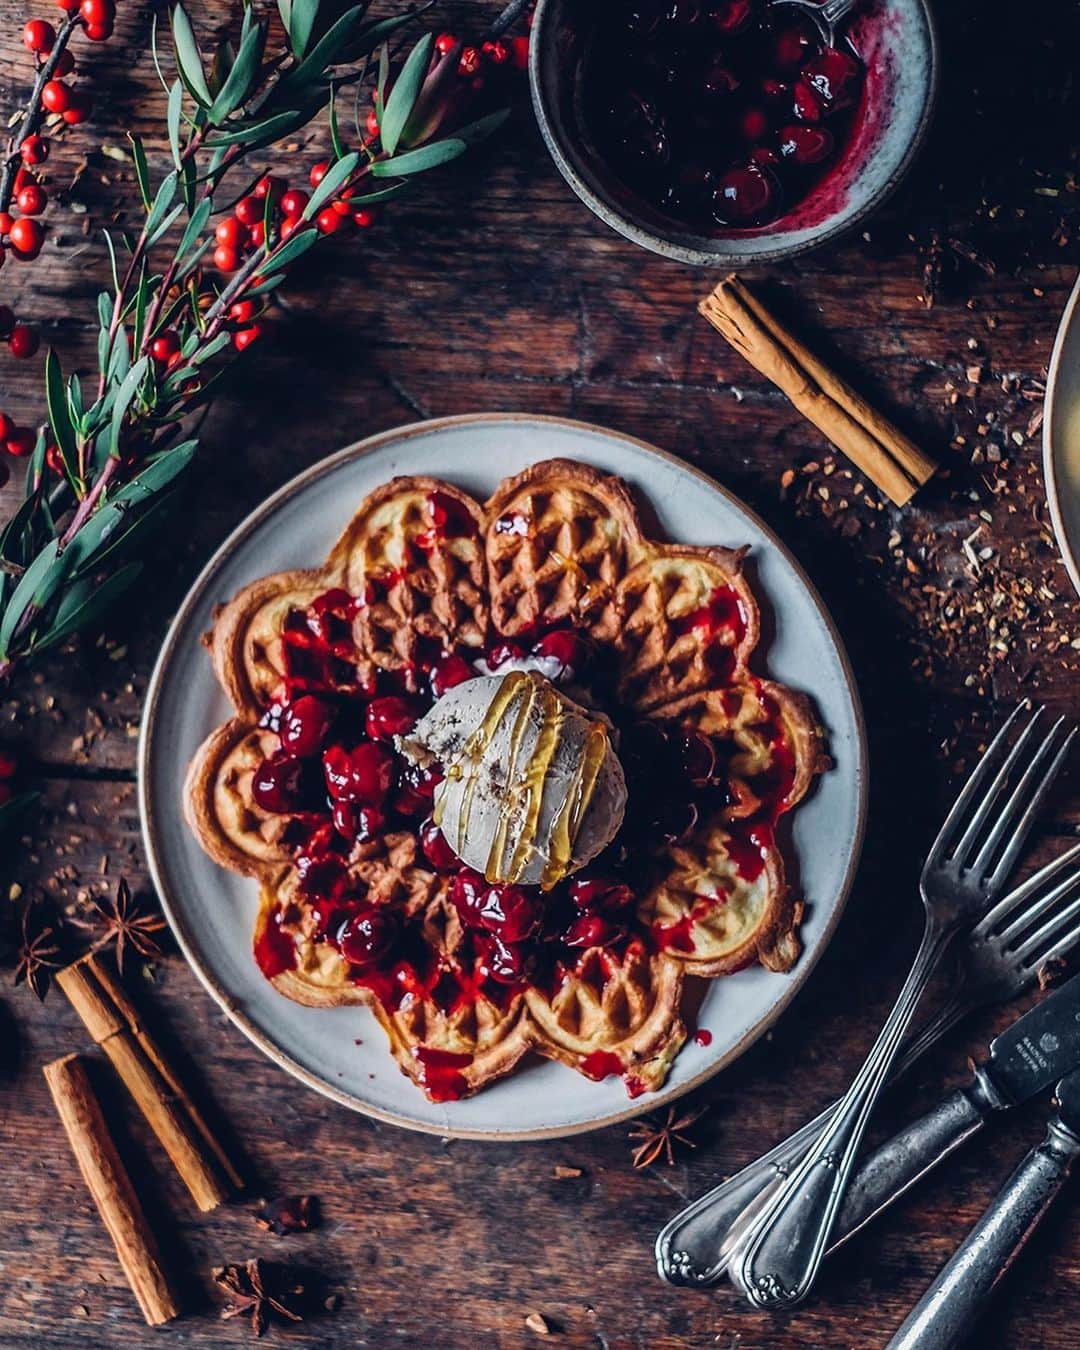 Our Food Storiesのインスタグラム：「These cold and grey days call for some comfort food 🤗 Get the recipe for these delicious gluten-free waffles with homemade chai ice-cream on the blog, link is in profile. #ourfoodstories  ____ #glutenfreerecipes #glutenfreefood #glutenfri #glutenfrei #wafflerecipe #breakfastideas #onthetable #gatheringslikethese #momentslikethese #foodphotographer #foodstylist #germanfoodblogger #recipeideas」